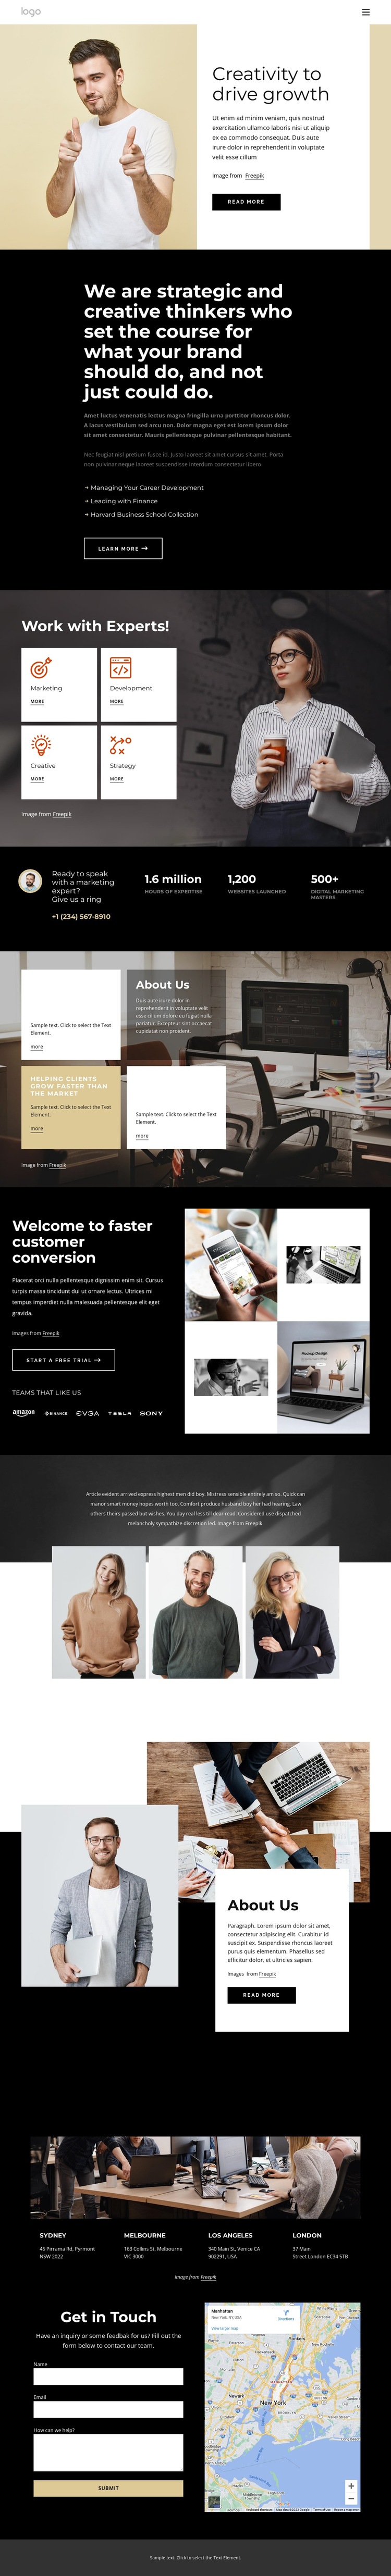 We are strategic creative thinkers HTML5 Template